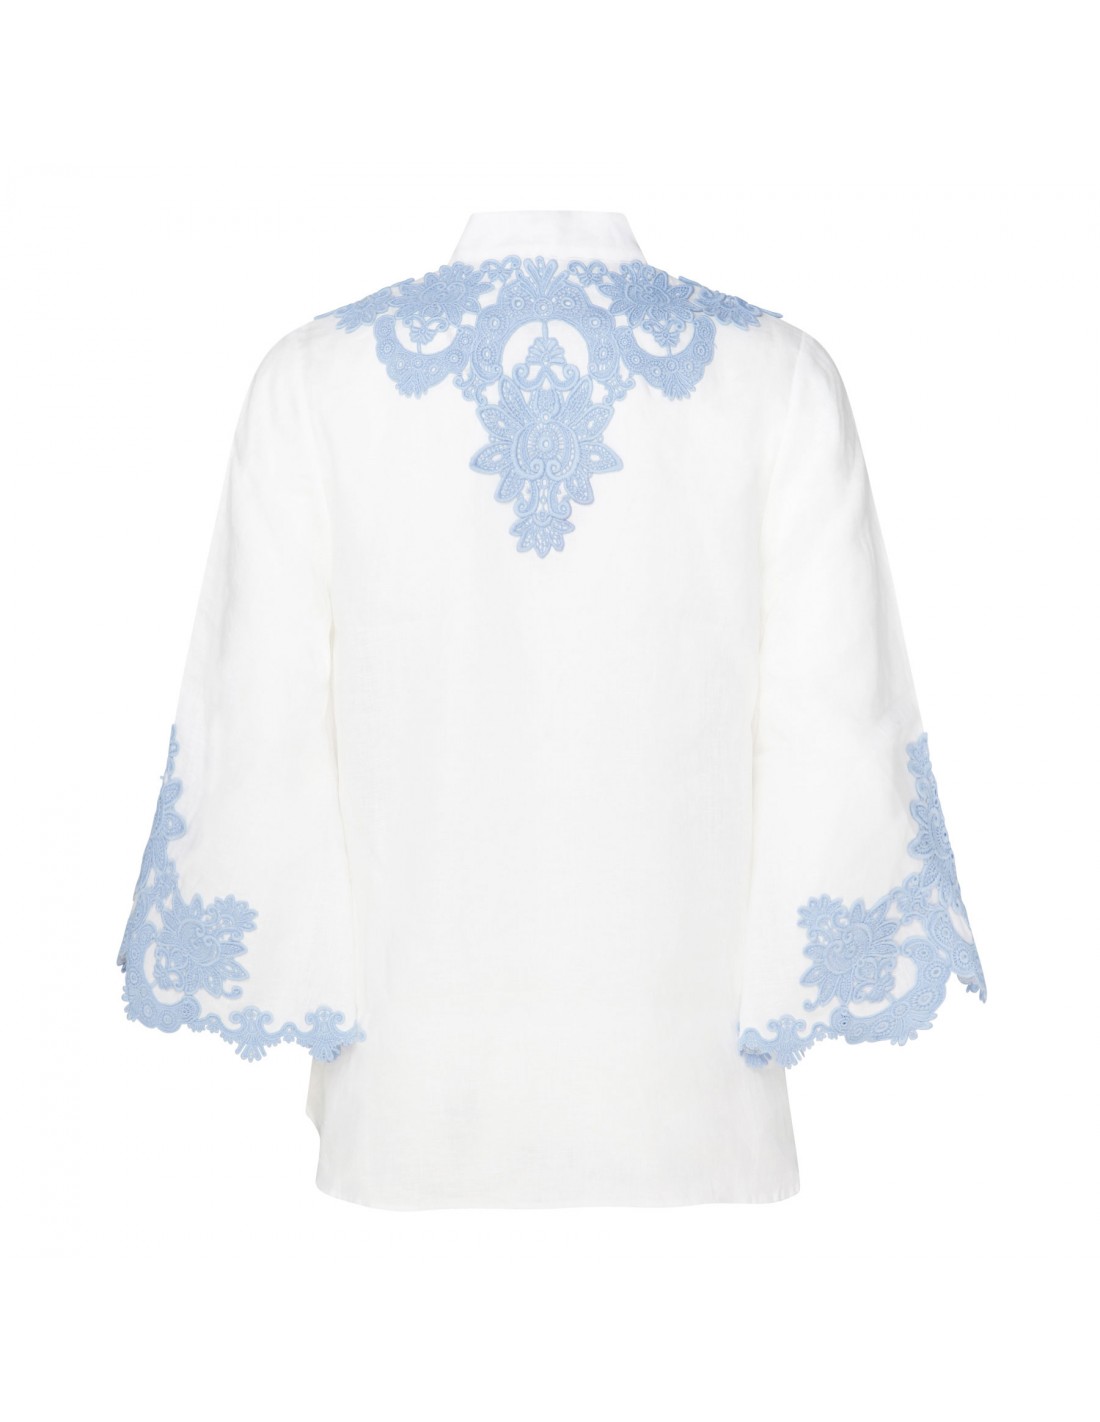 Raie embroidered trim top